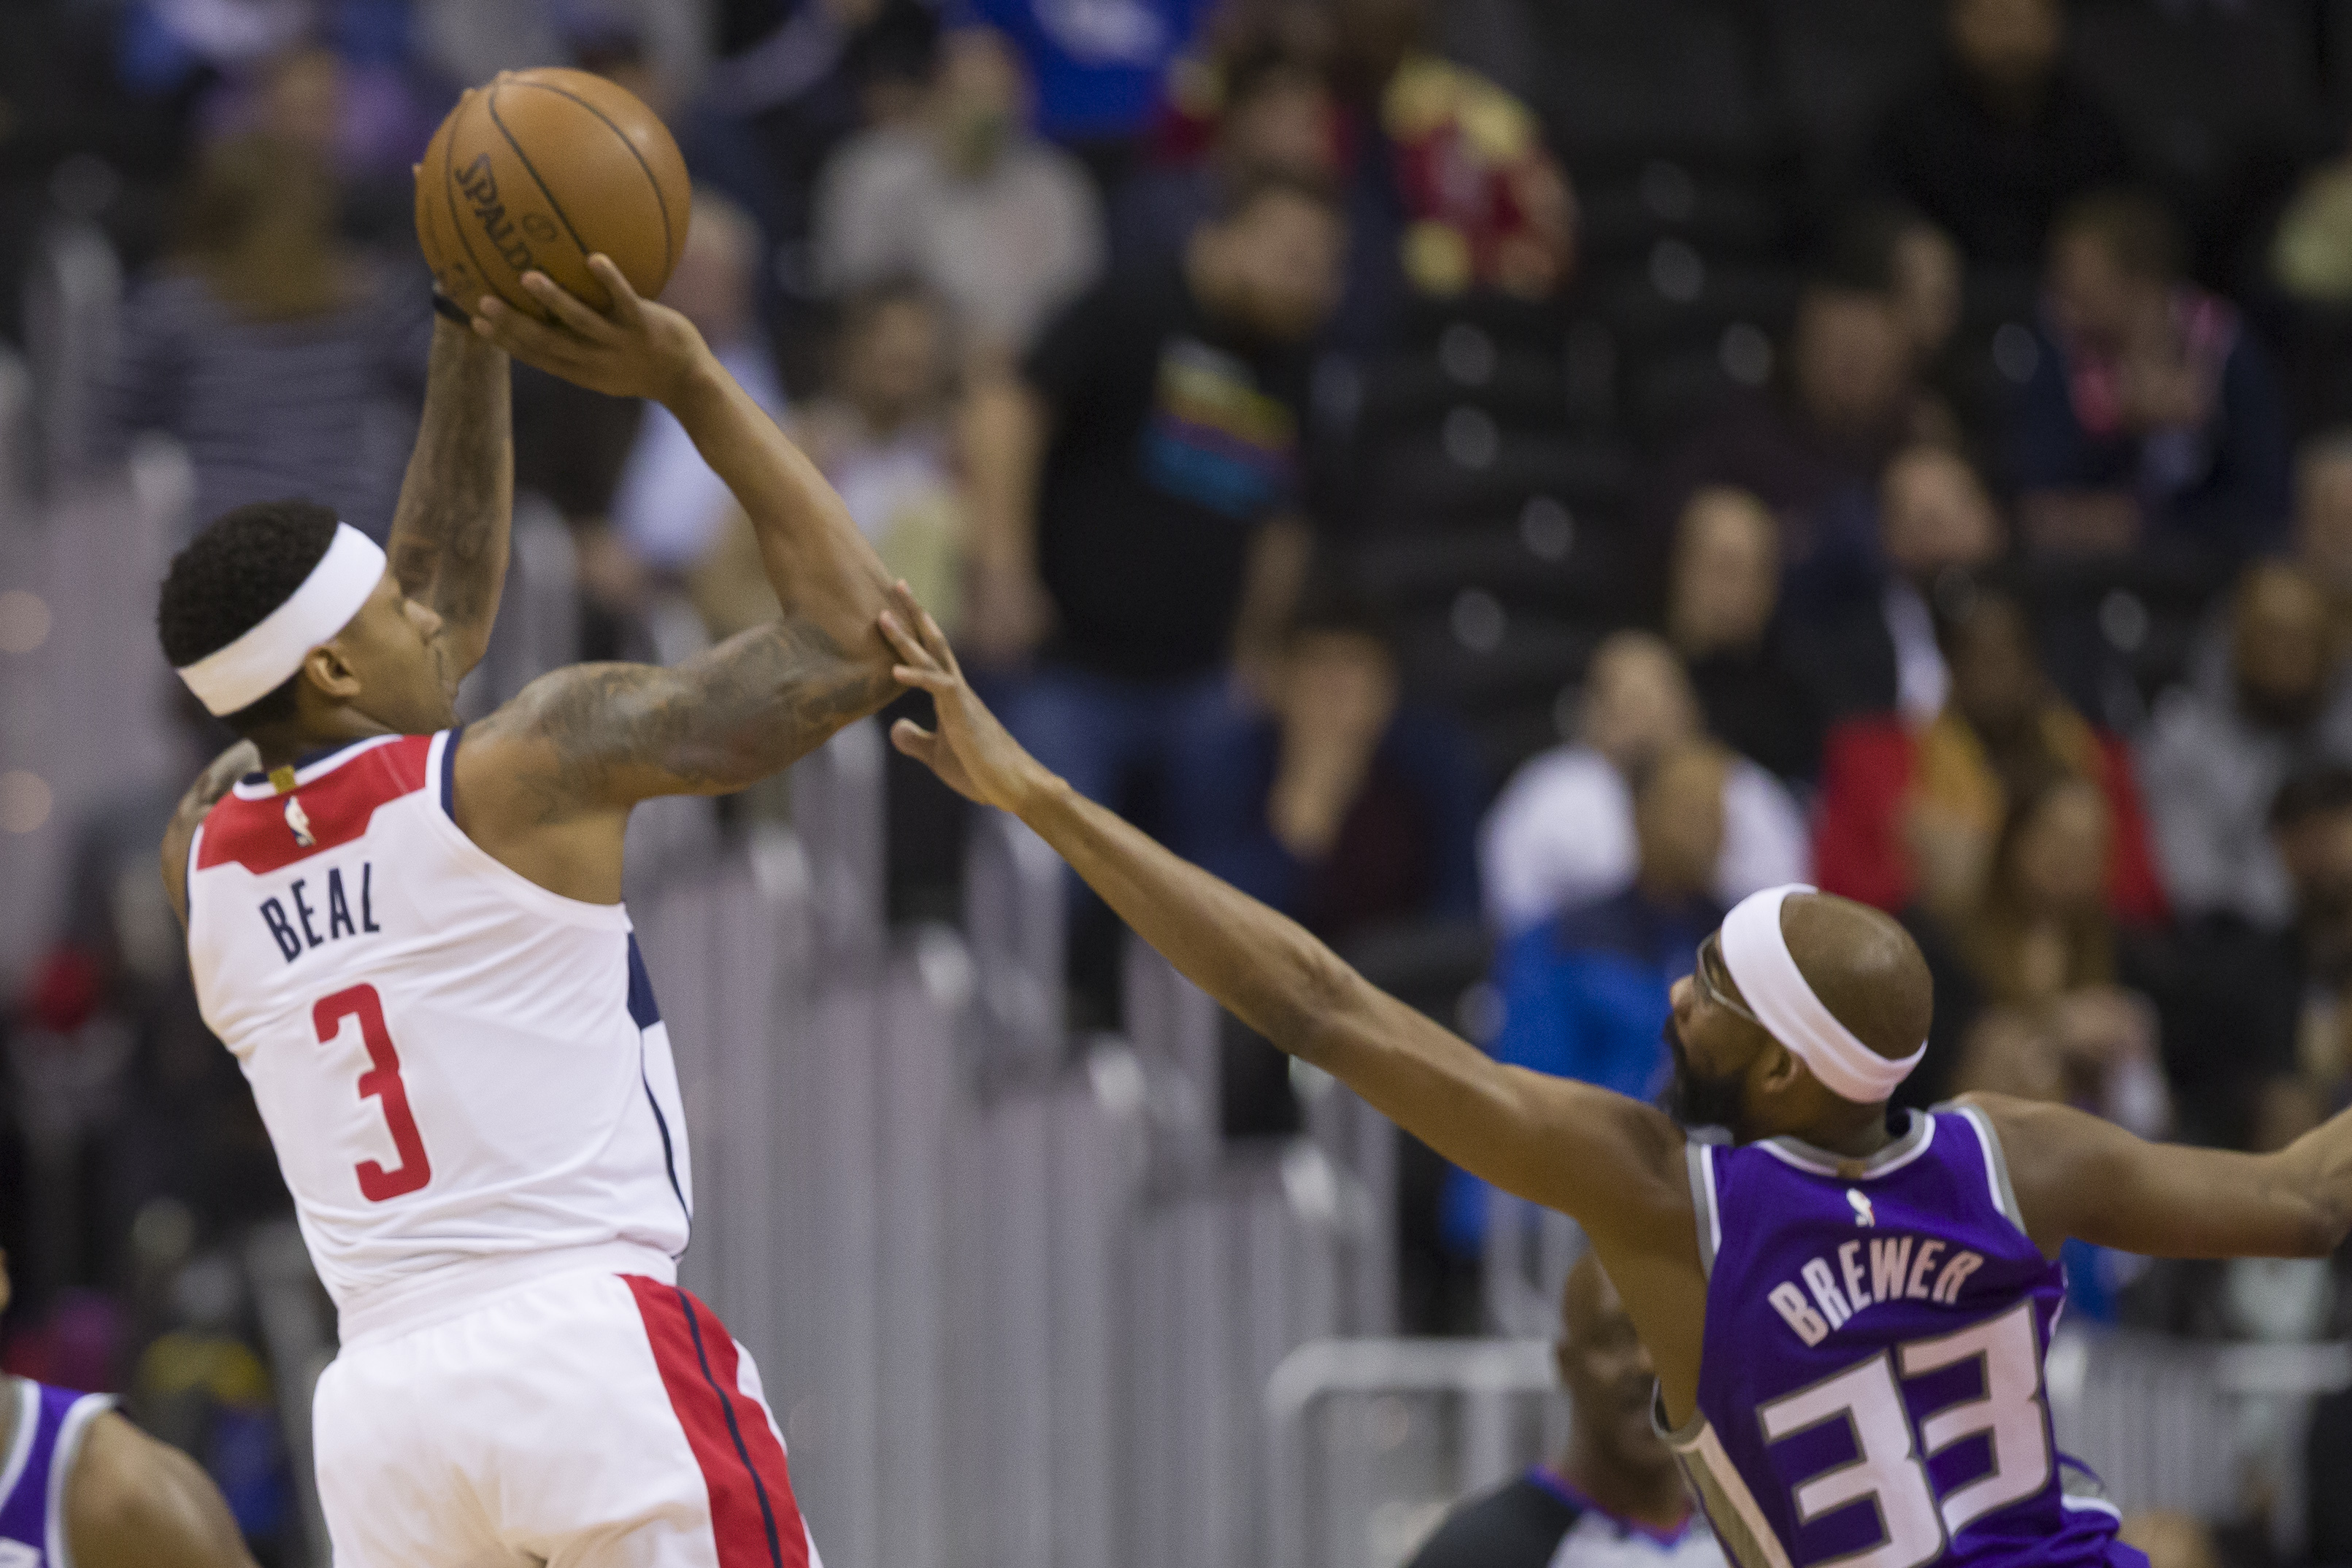 Beal’s late surge lifts Wizards to 121-115 win over Kings